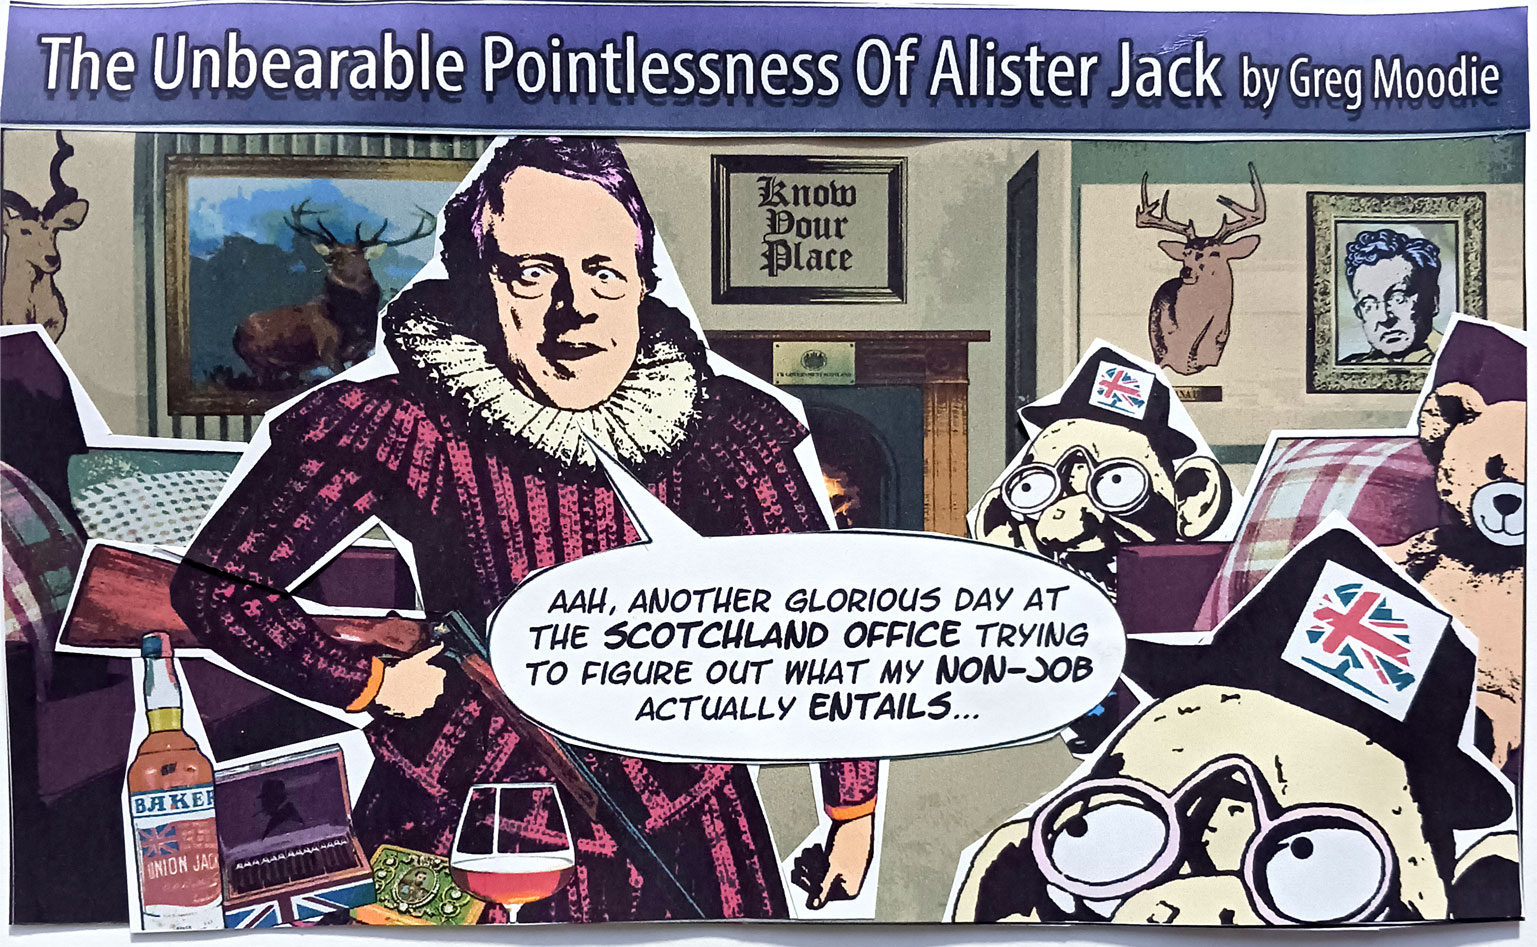 The Unbearable Pointlessness Of Alister Jack